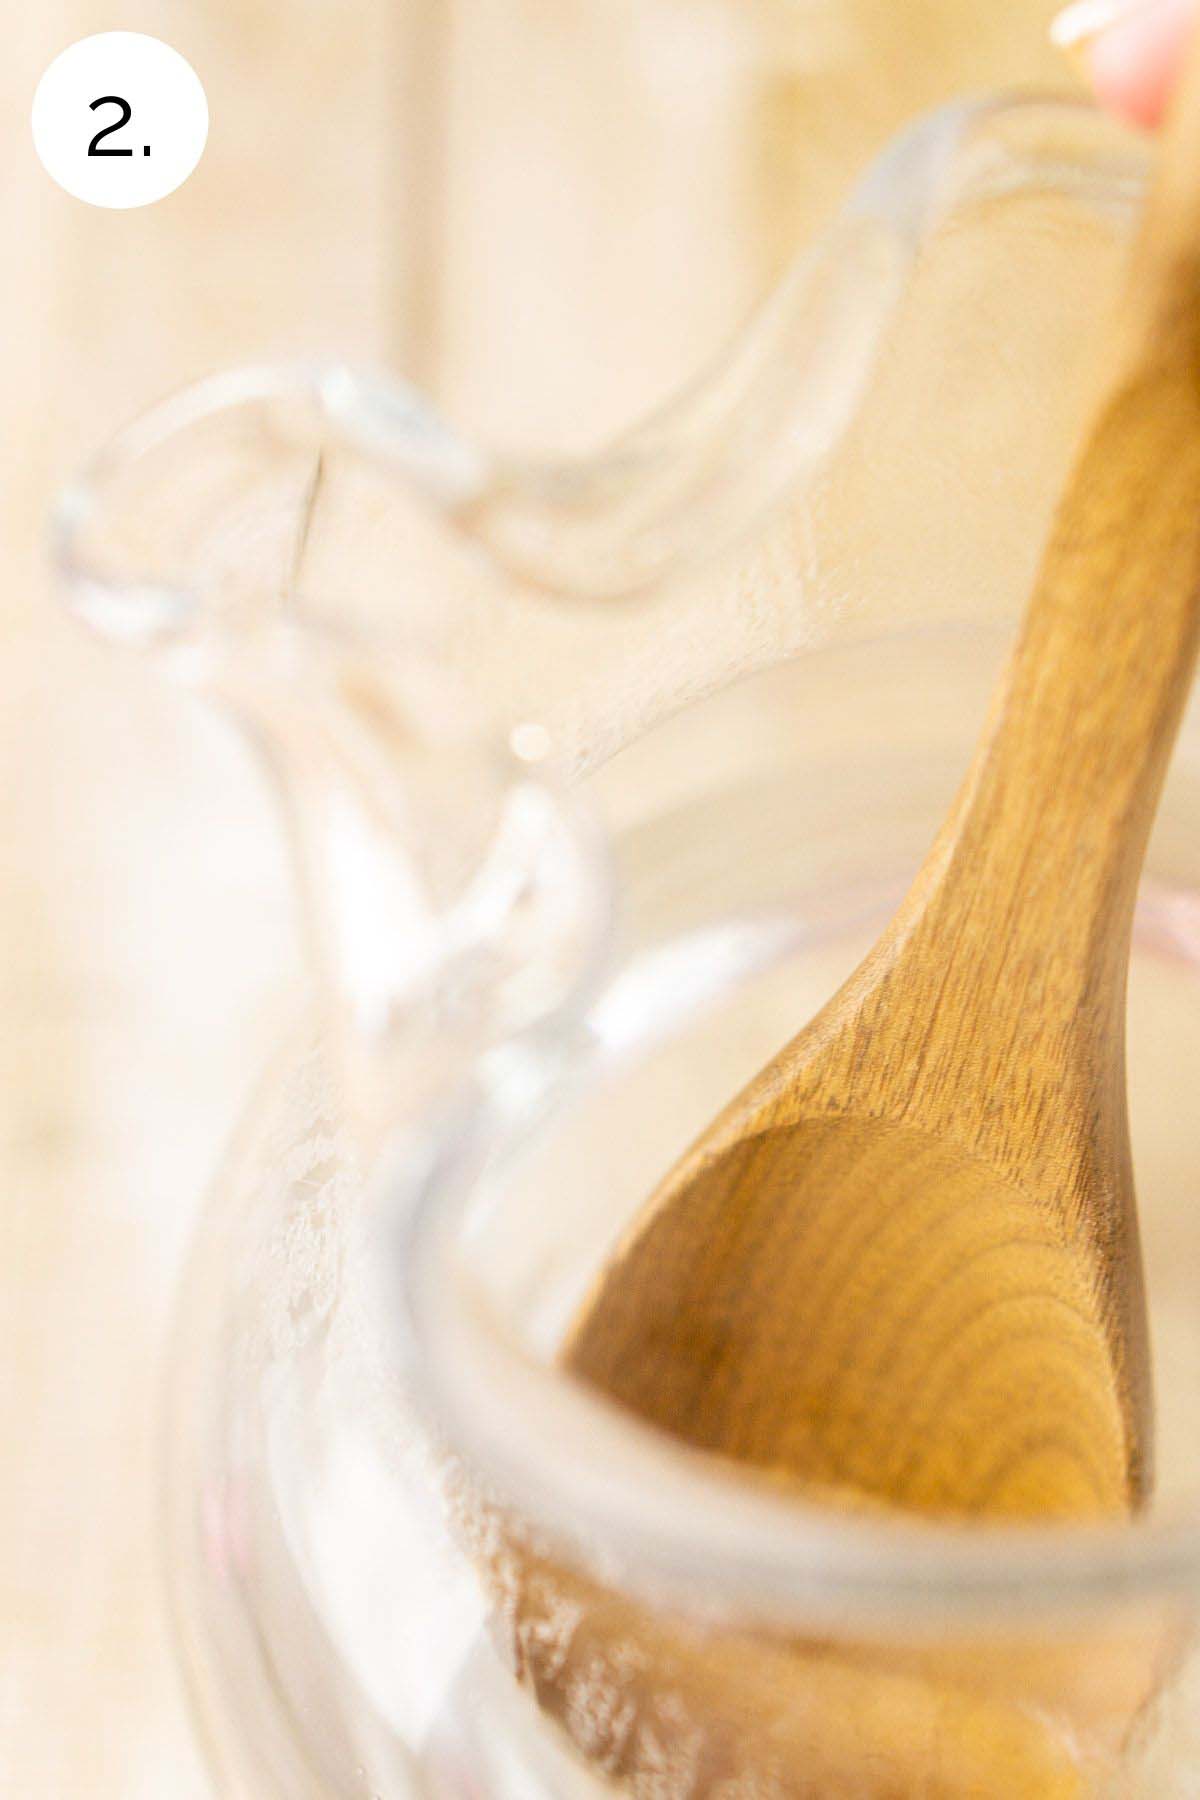 Stirring the sugar and hot water with a wooden spoon in a clear pitcher.